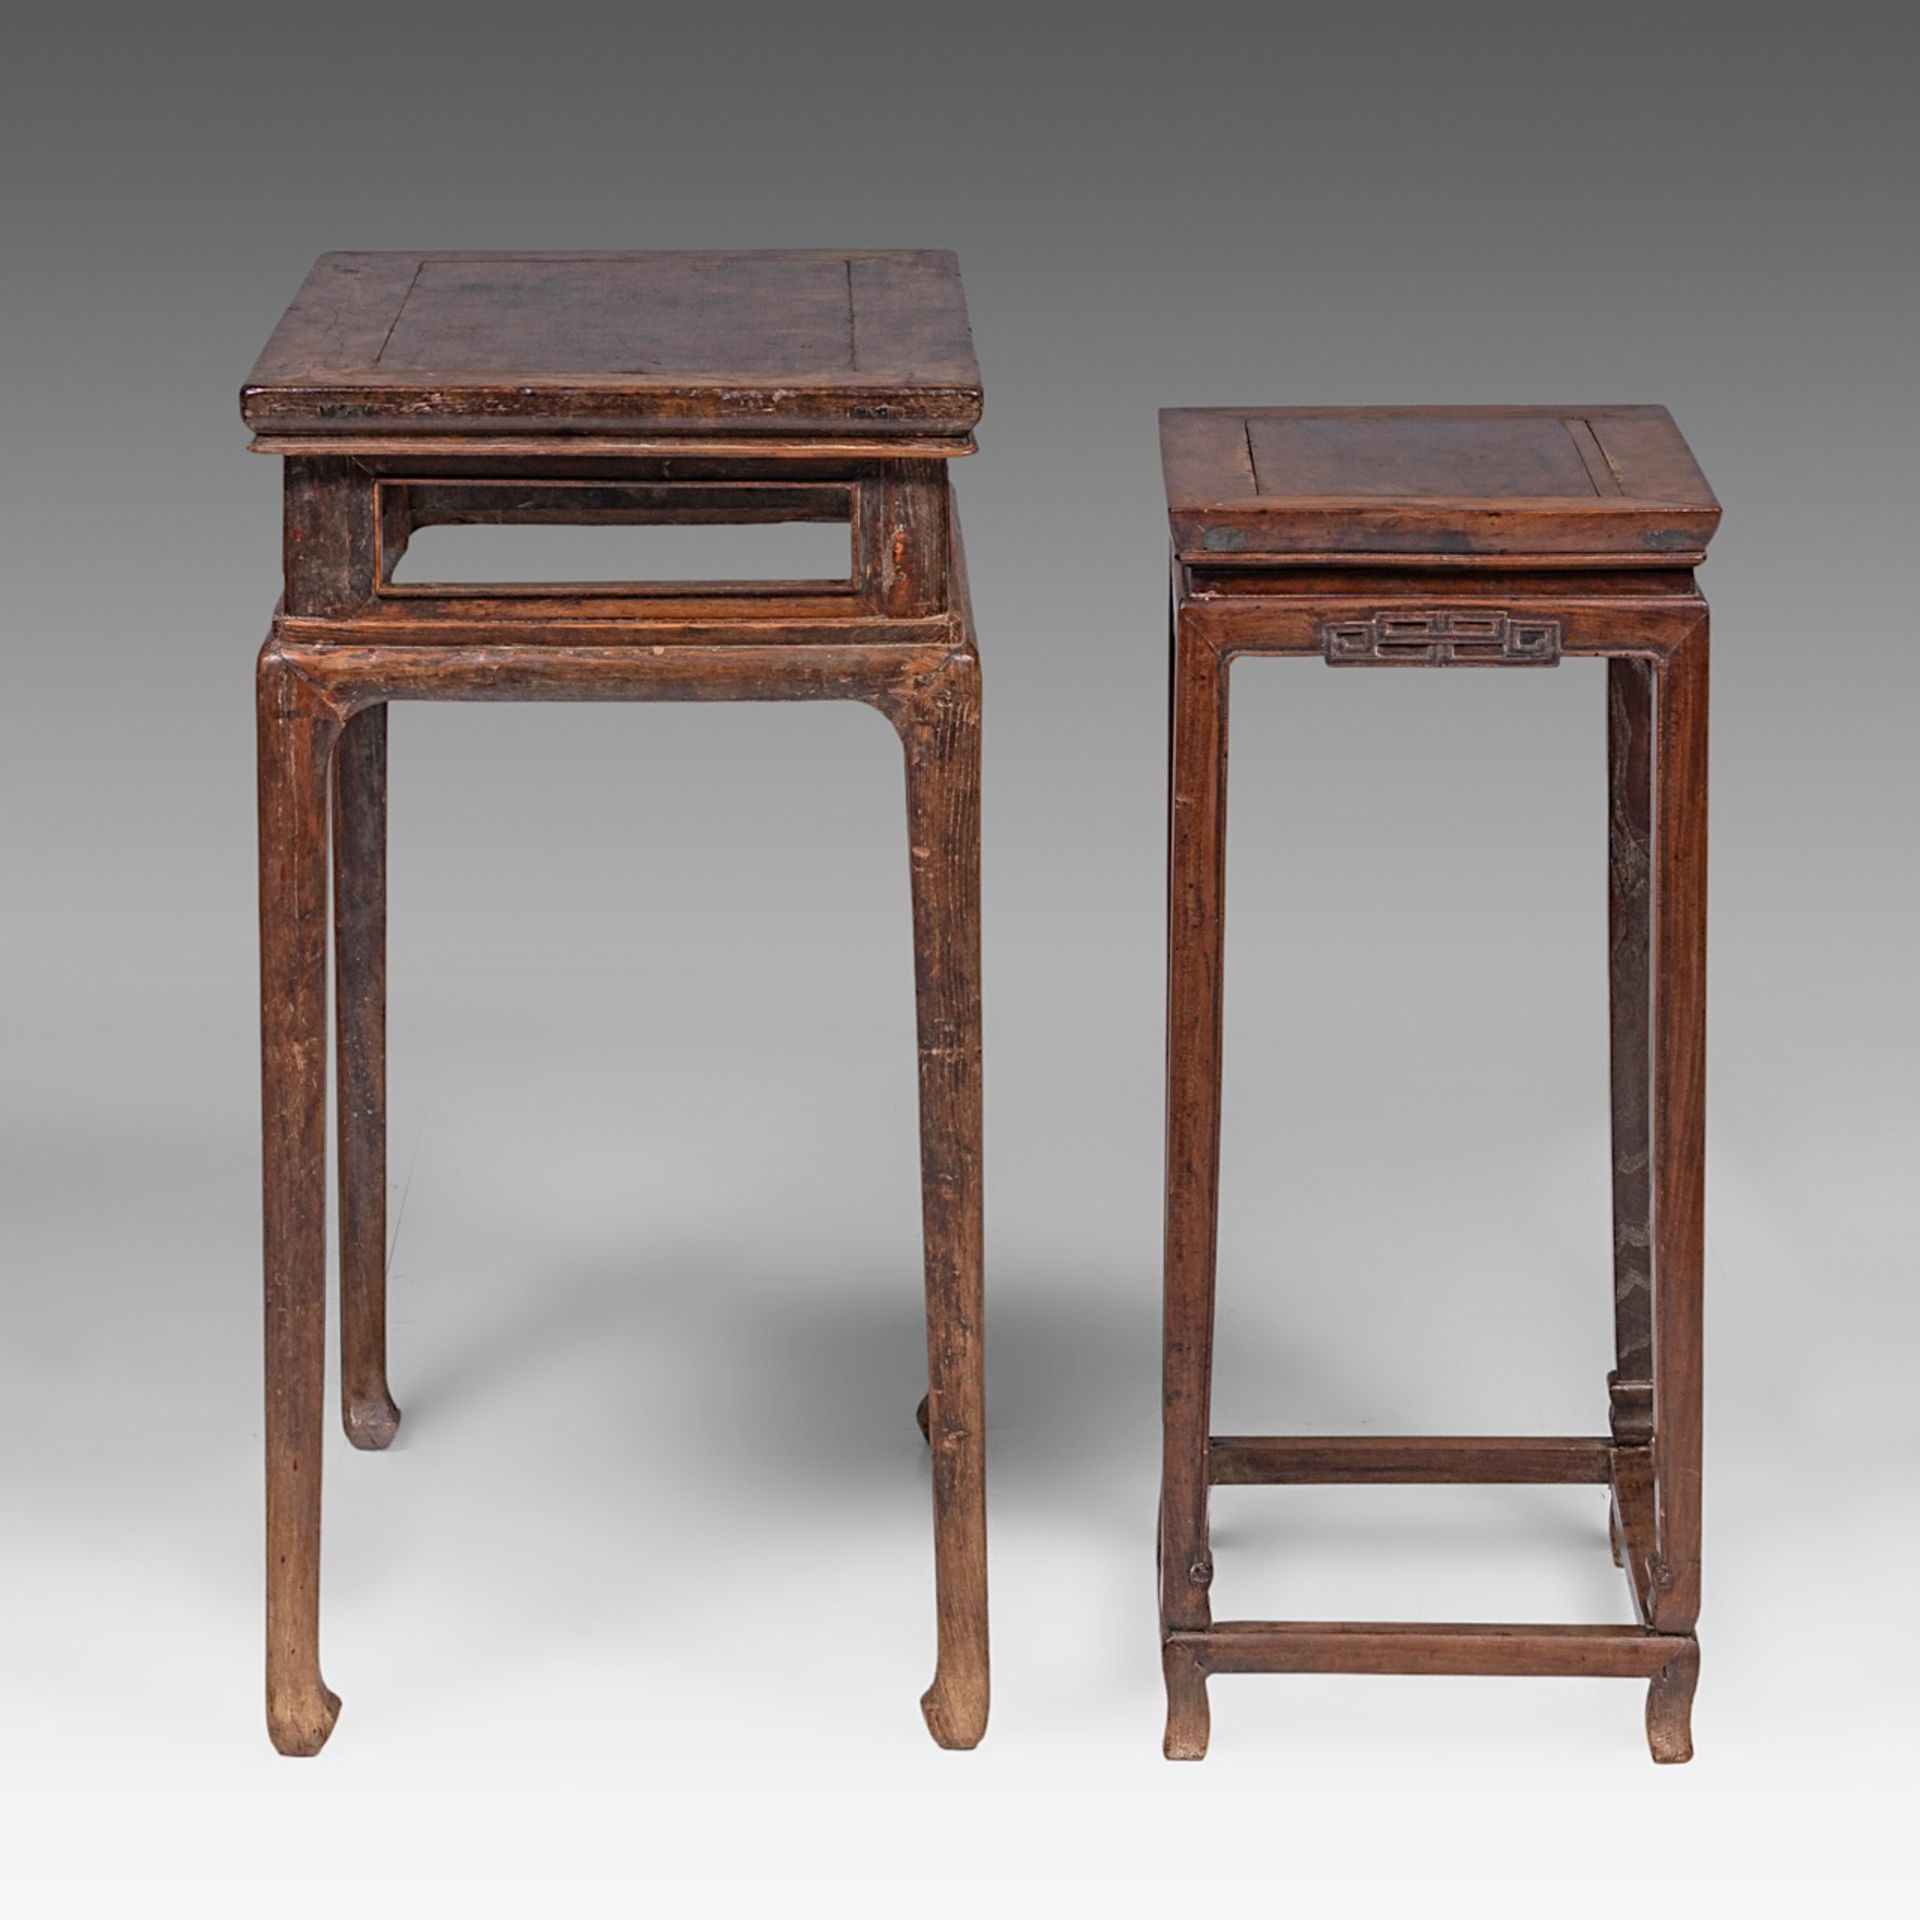 Two Chinese hardwood side tables, mid - late Qing dynasty, largest H 82 - 69 x 42 cm - Bild 5 aus 7